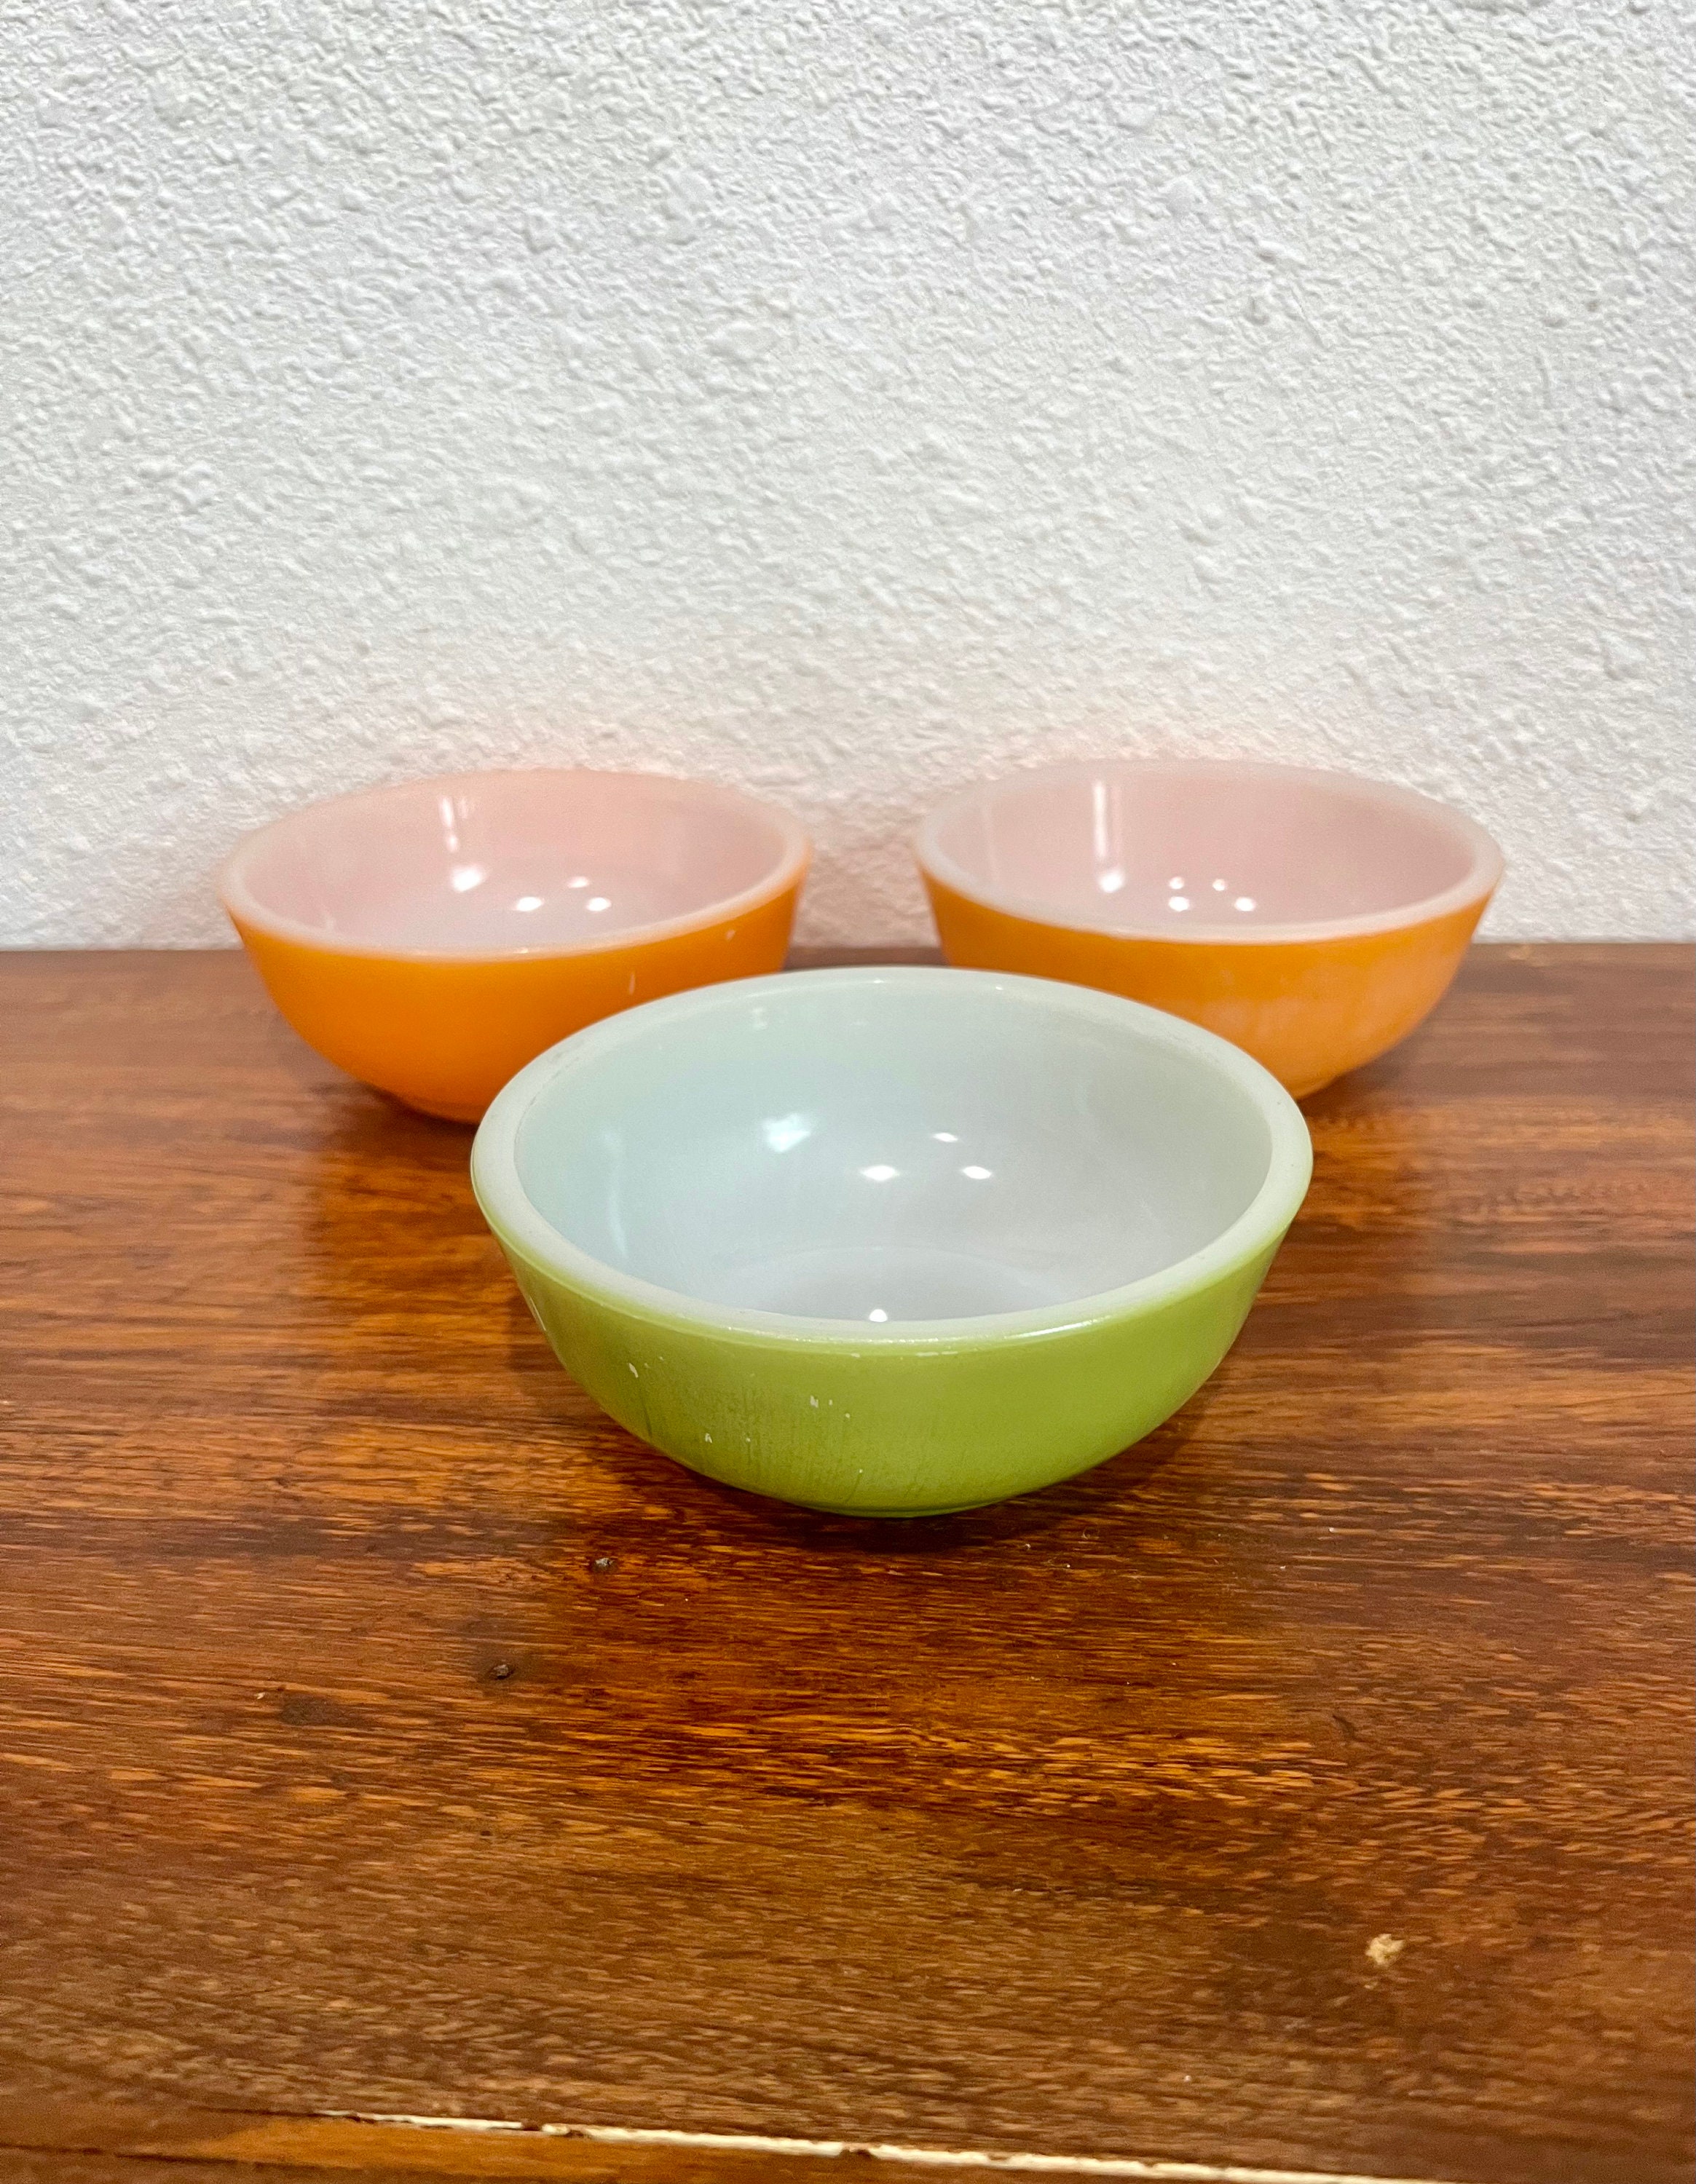 Mintra Home Plastic Bowls with Handles 2 Pack (Large, Orange)